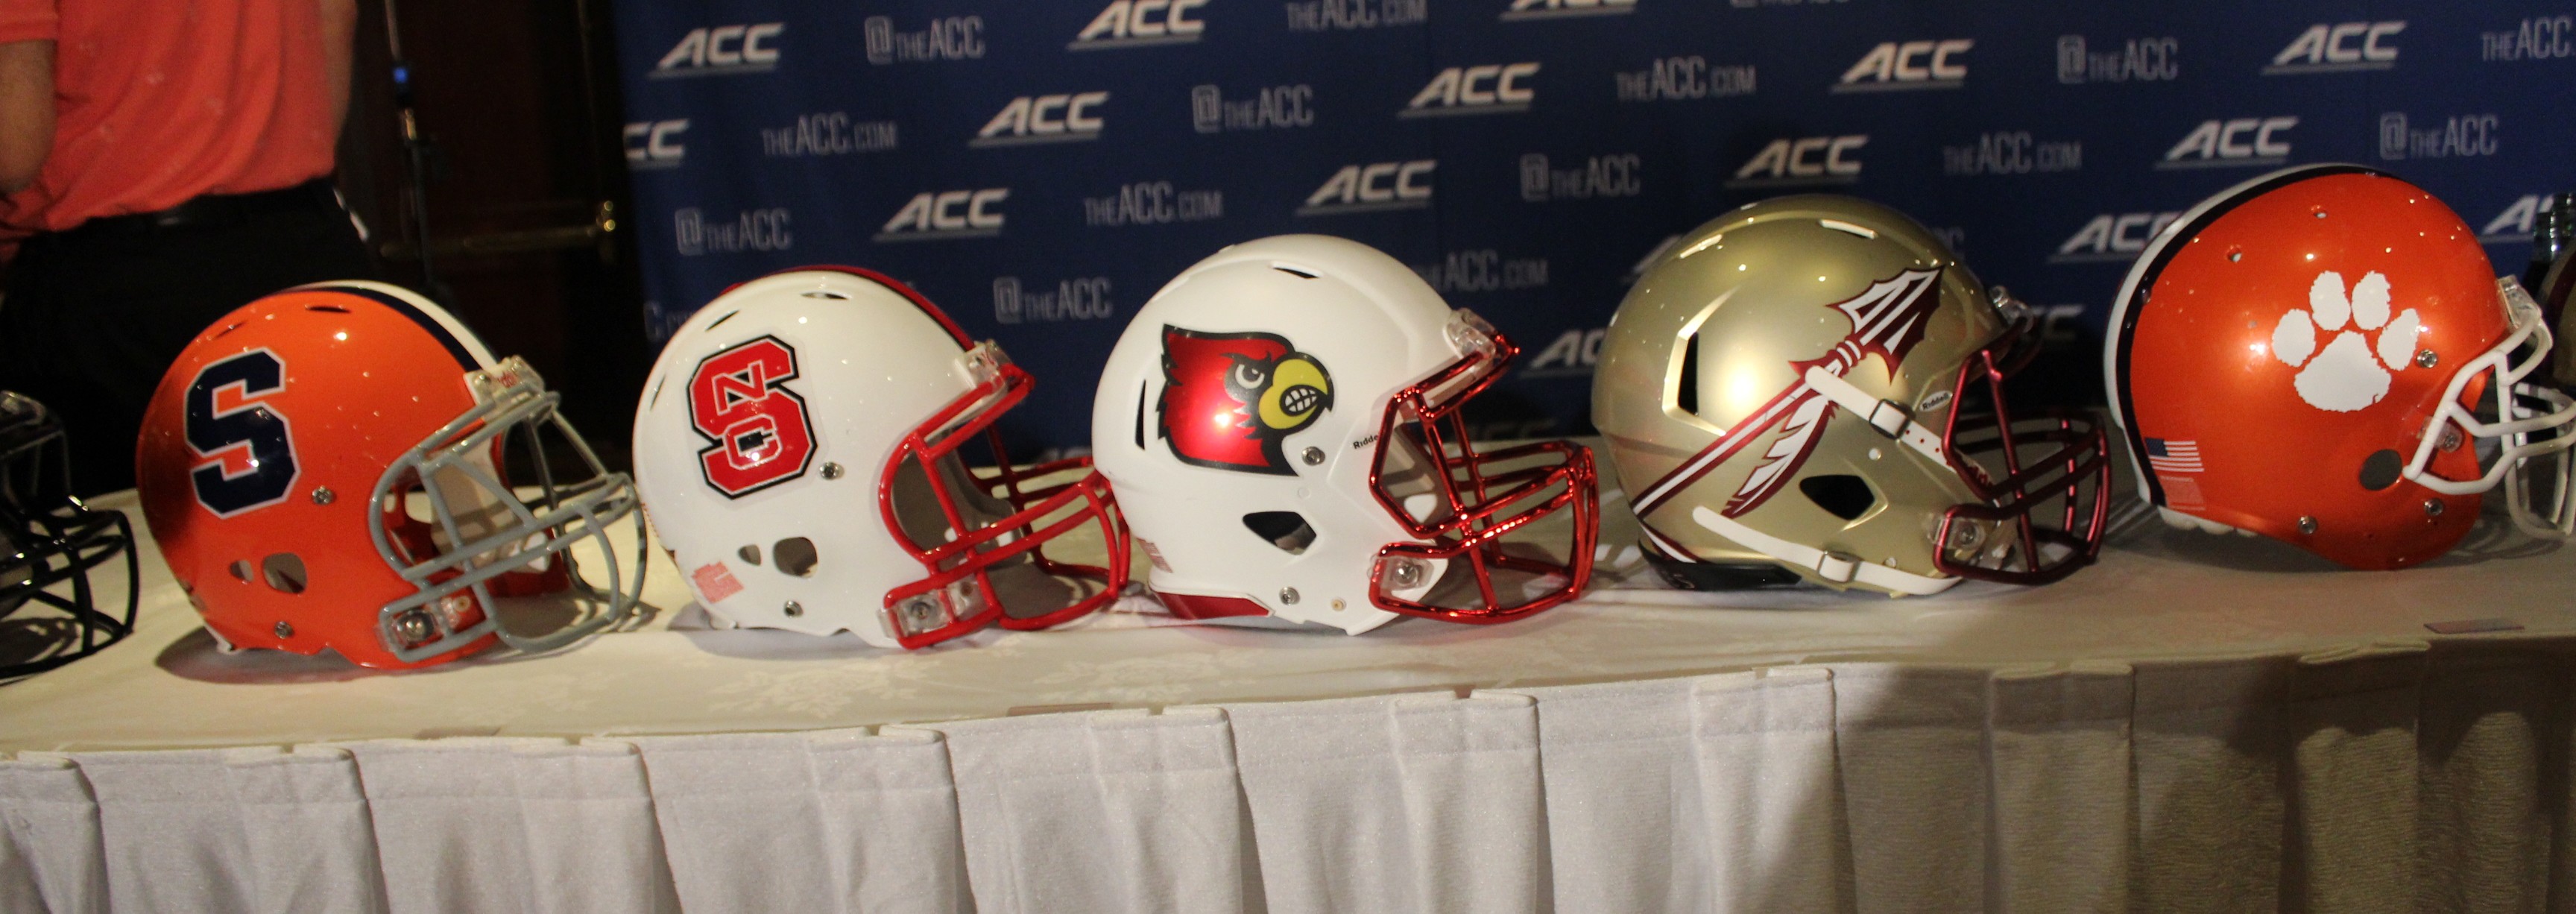 2014 ACC Kickoff Atlantic Division Helmets Fitted Photo by Mark Blankenbaker